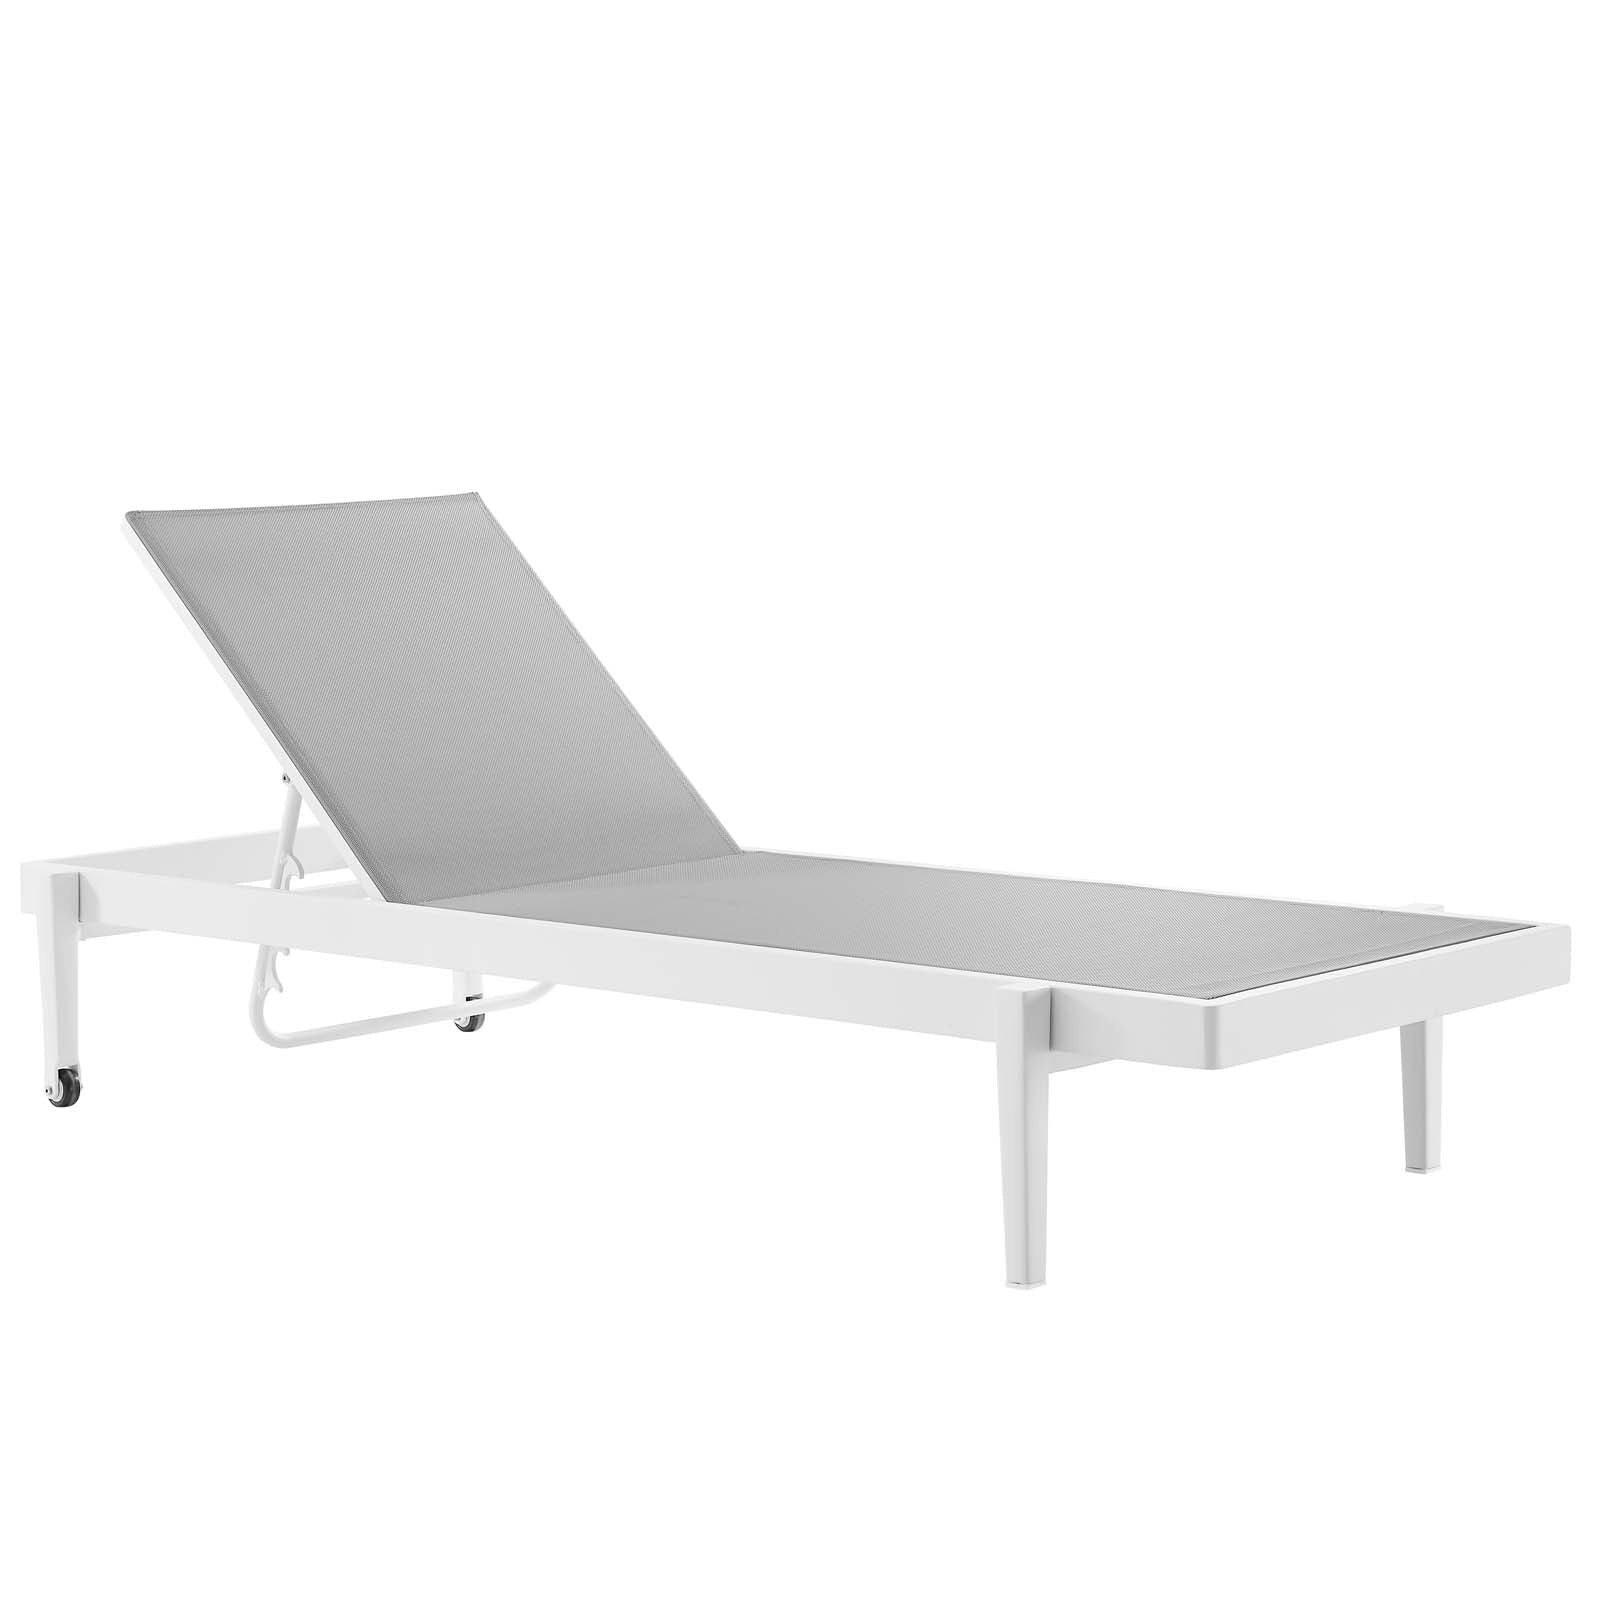 Charleston Outdoor Patio Chaise Lounge Chair - East Shore Modern Home Furnishings